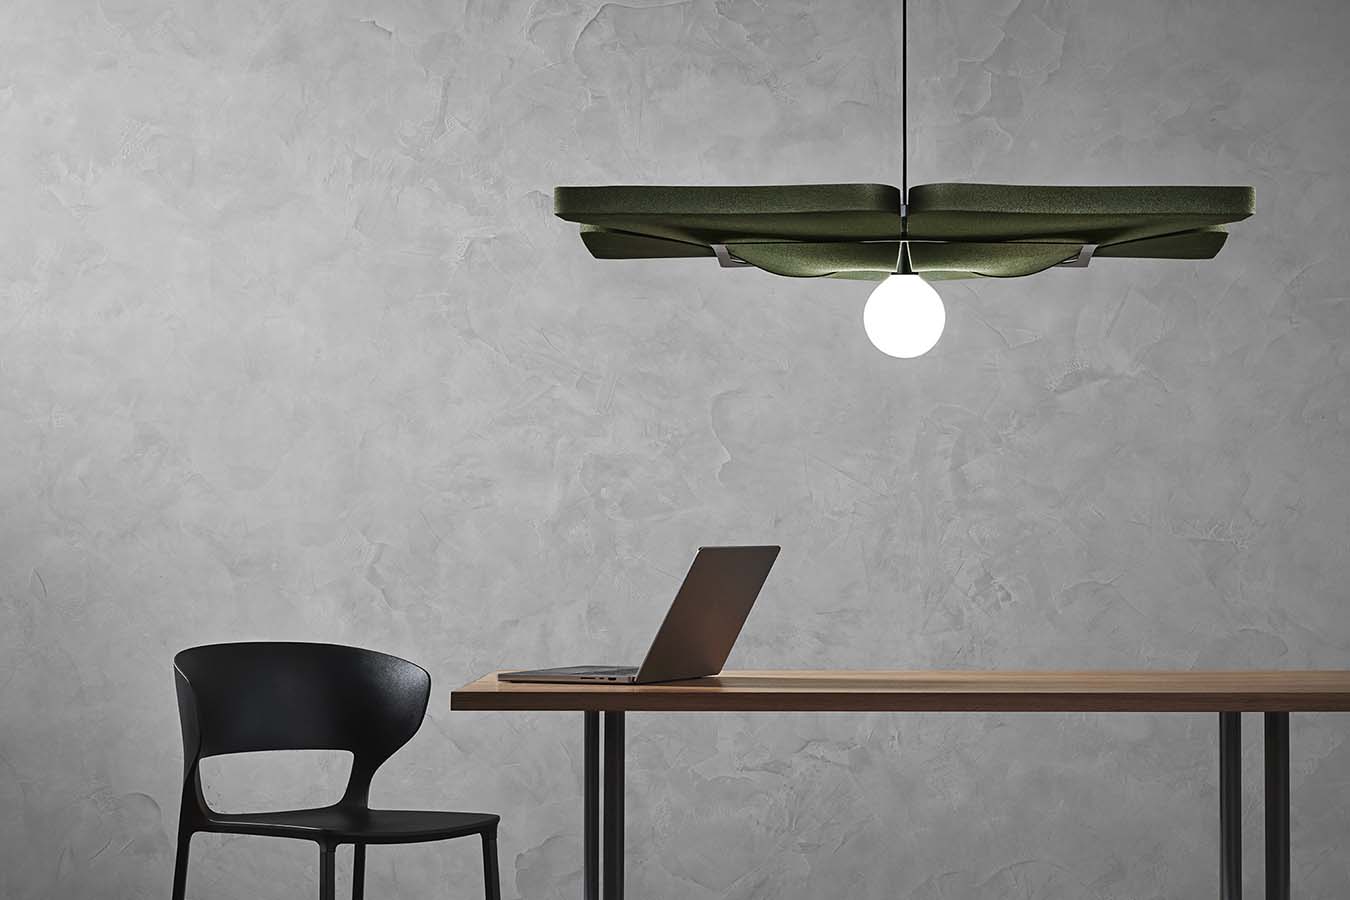 FOLI Acoustic Light product shot in an office space